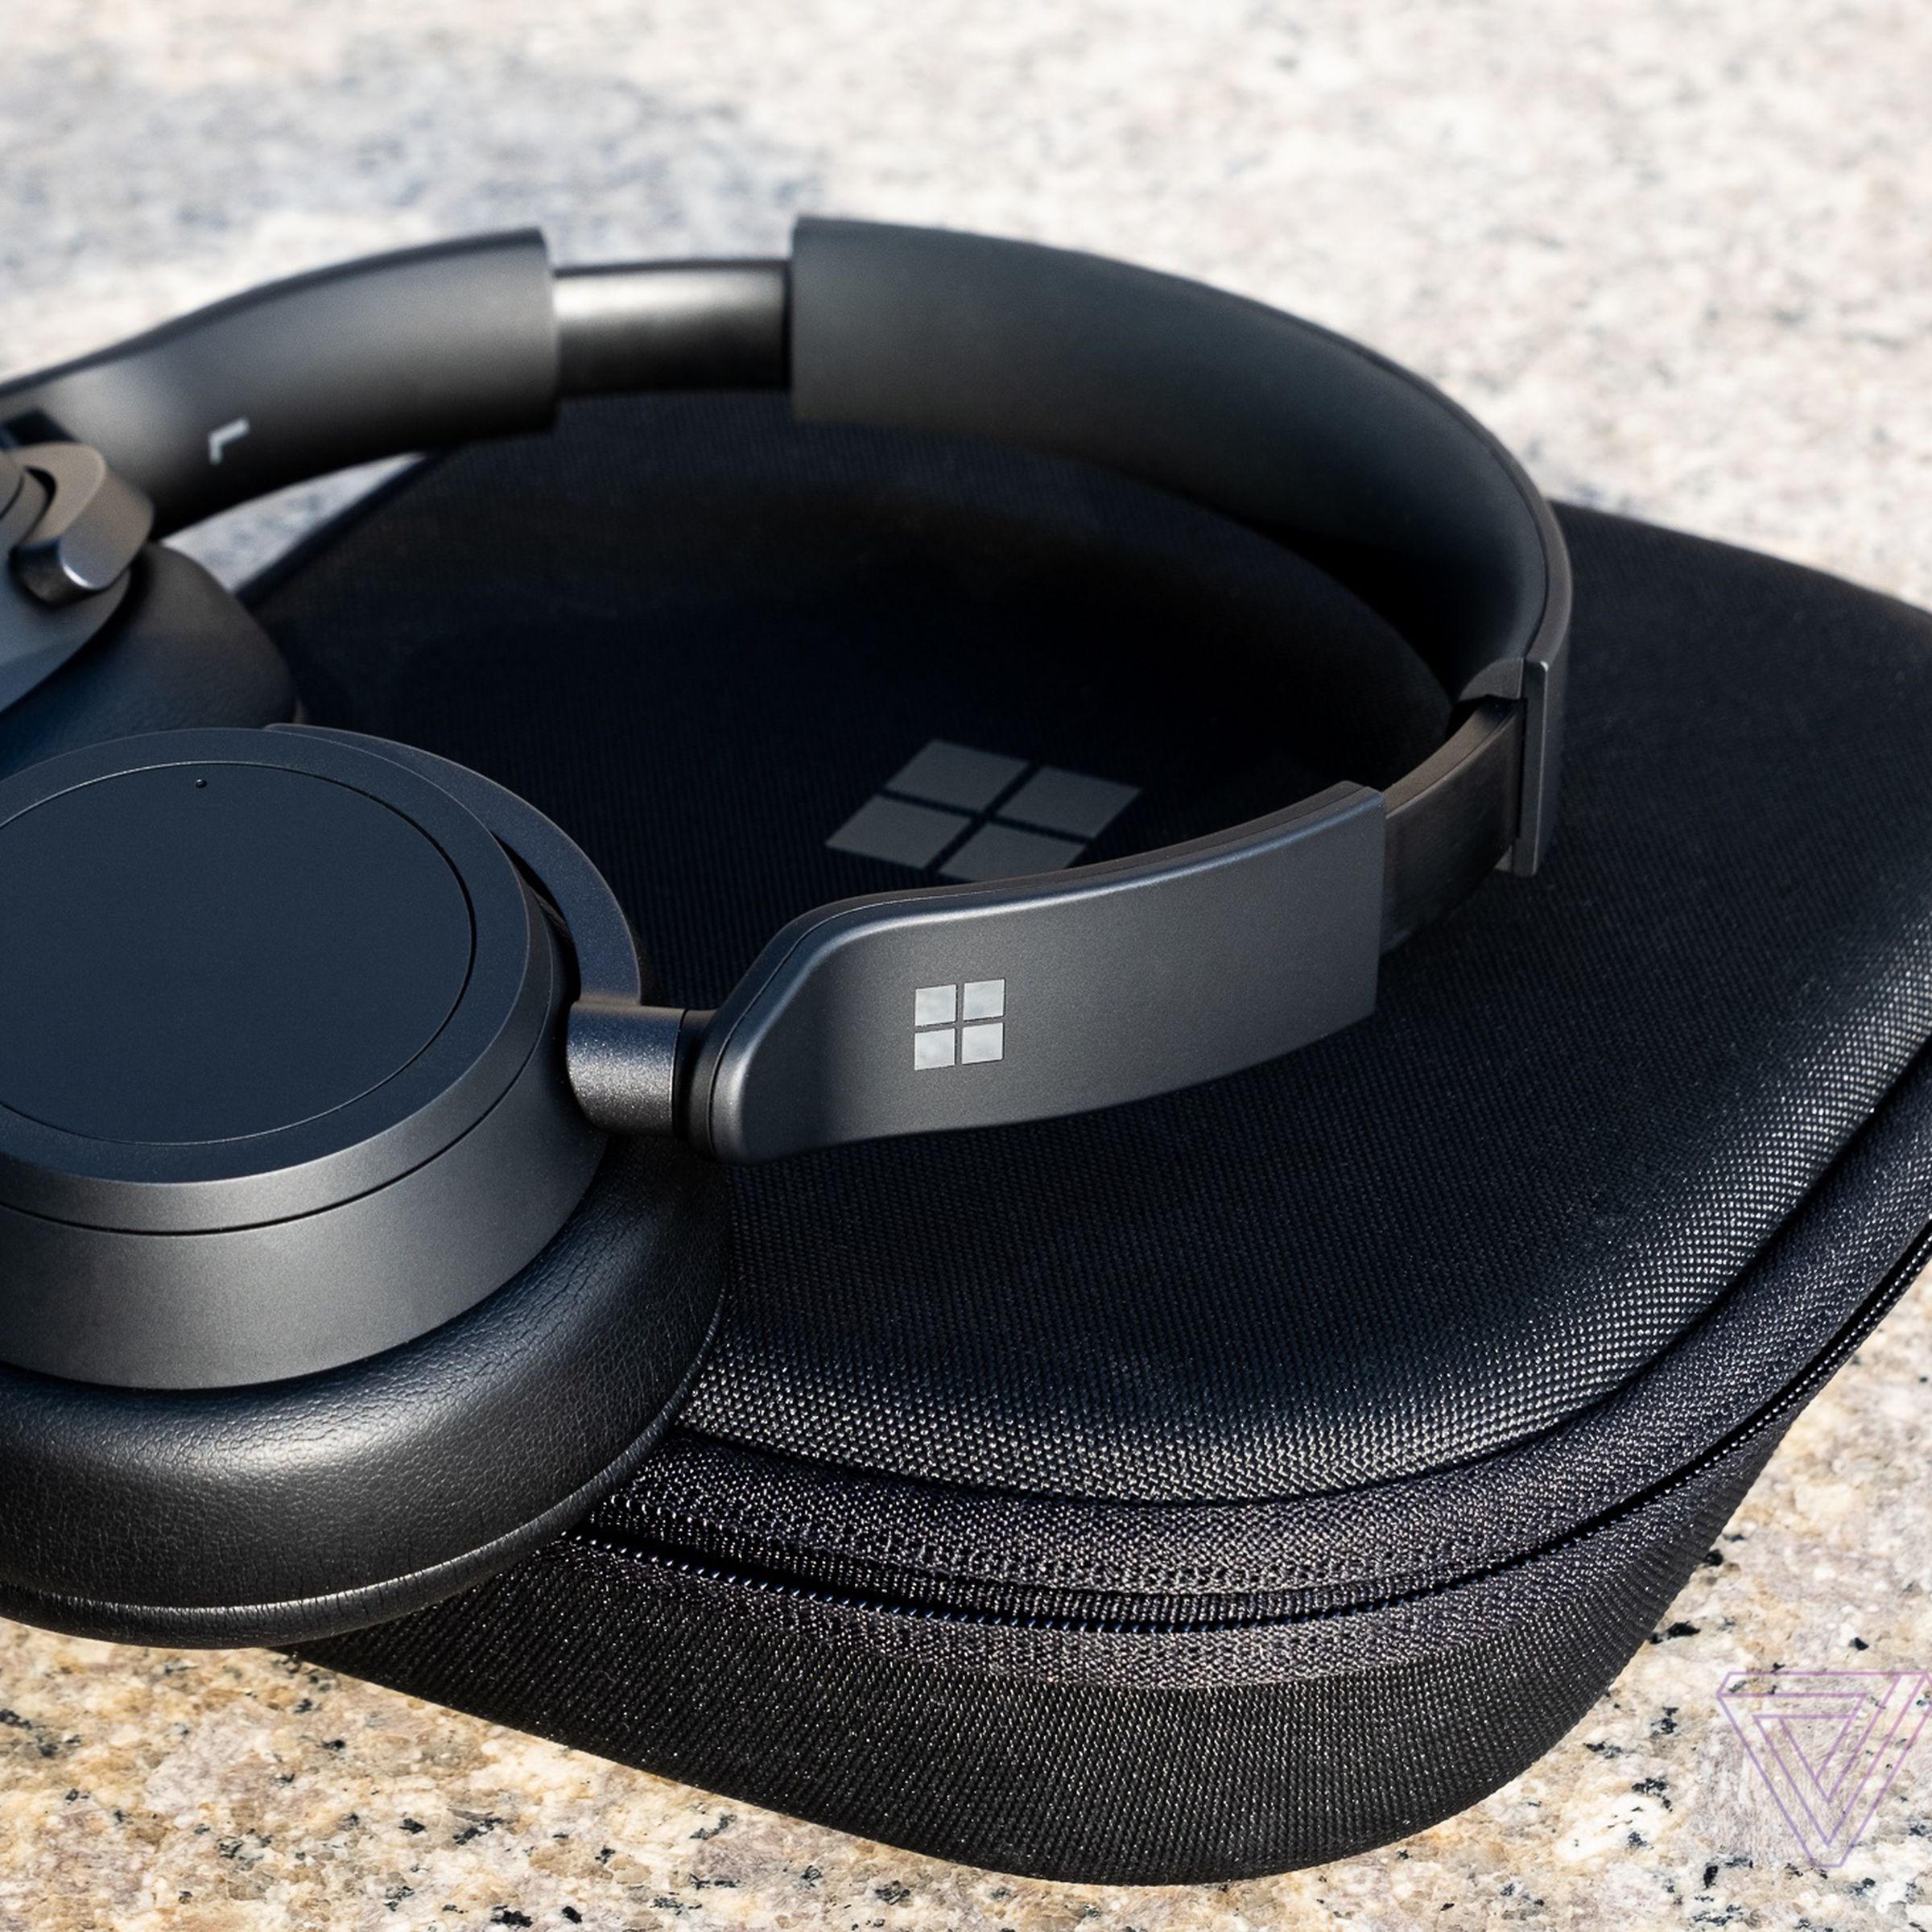 The Surface Headphones 2 pictured on their carrying case.